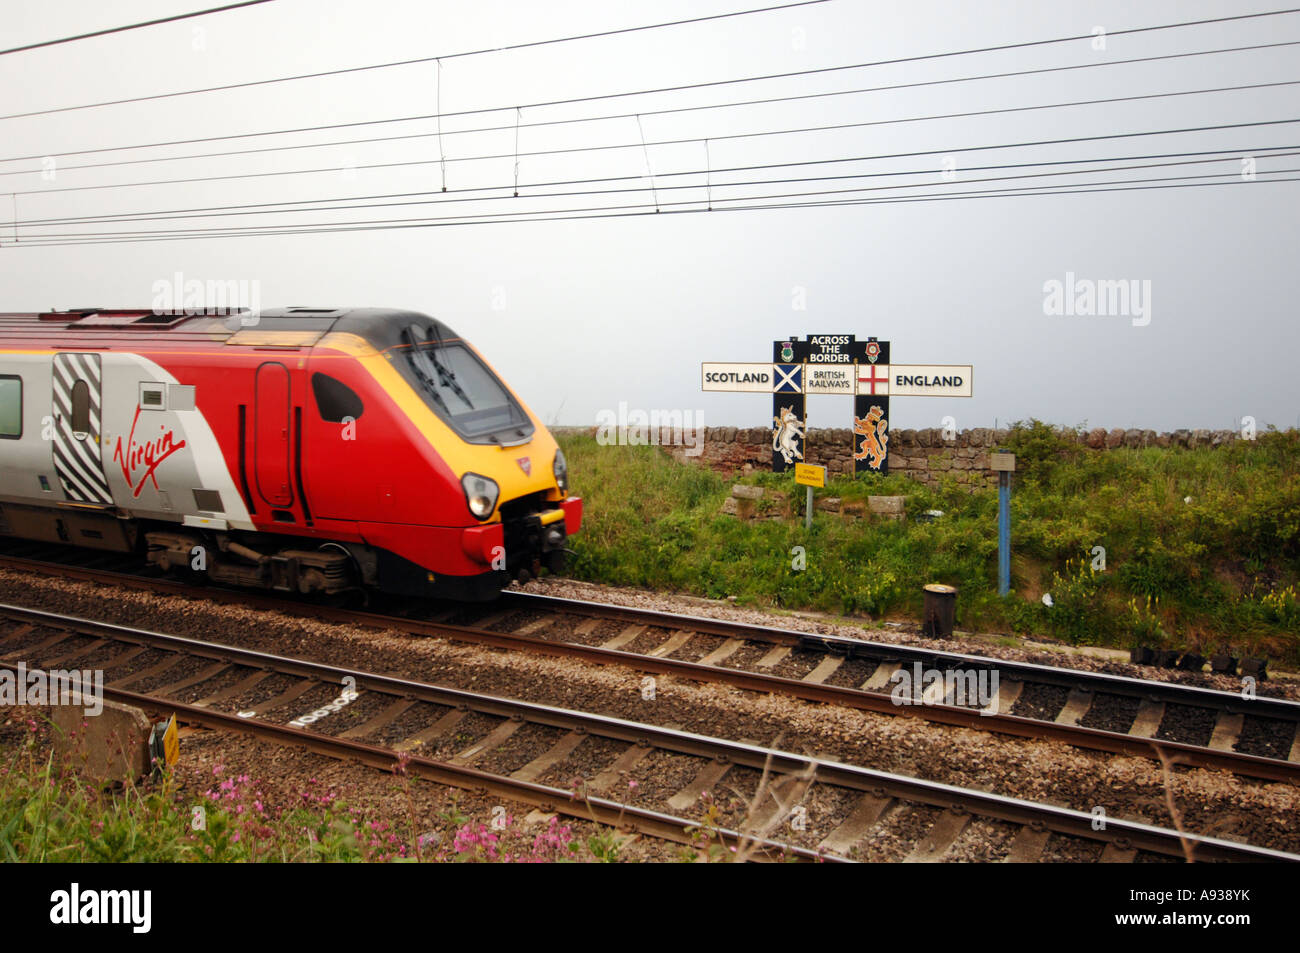 A Virgin Voyager High Speed Train speeds across the border from Scotland into England on a Virgin Cross Country express Stock Photo